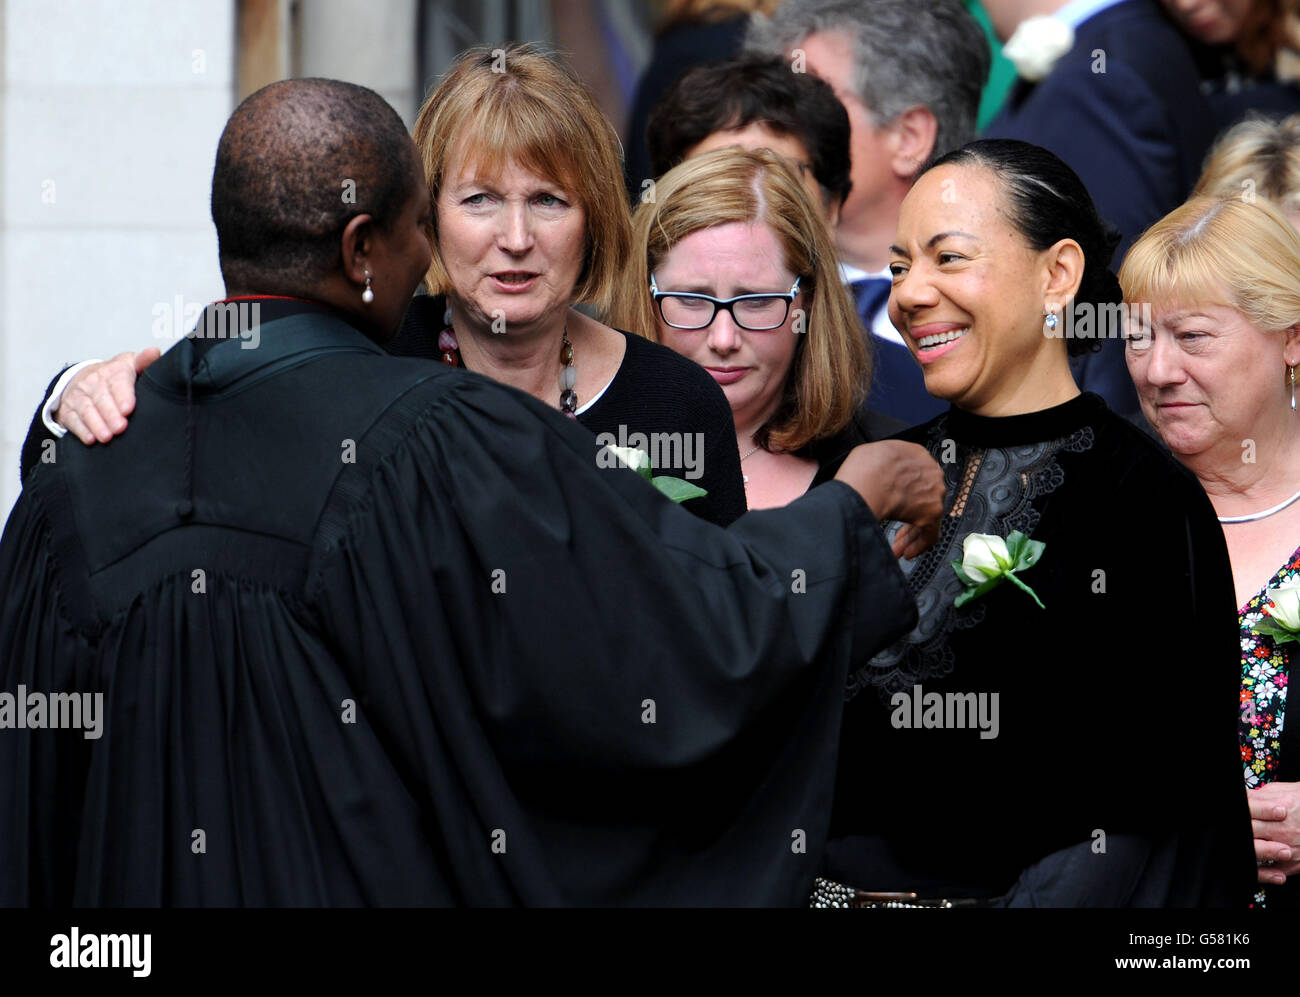 Labour MP Harriet Harman and Oona King (second right), with Speaker's Chaplain, the Reverend Rose Hudson-Wilkin, as they leave following a Service of Prayer and Remembrance to commemorate murdered MP Jo Cox, at St Margaret's in Westminster, central London. Stock Photo